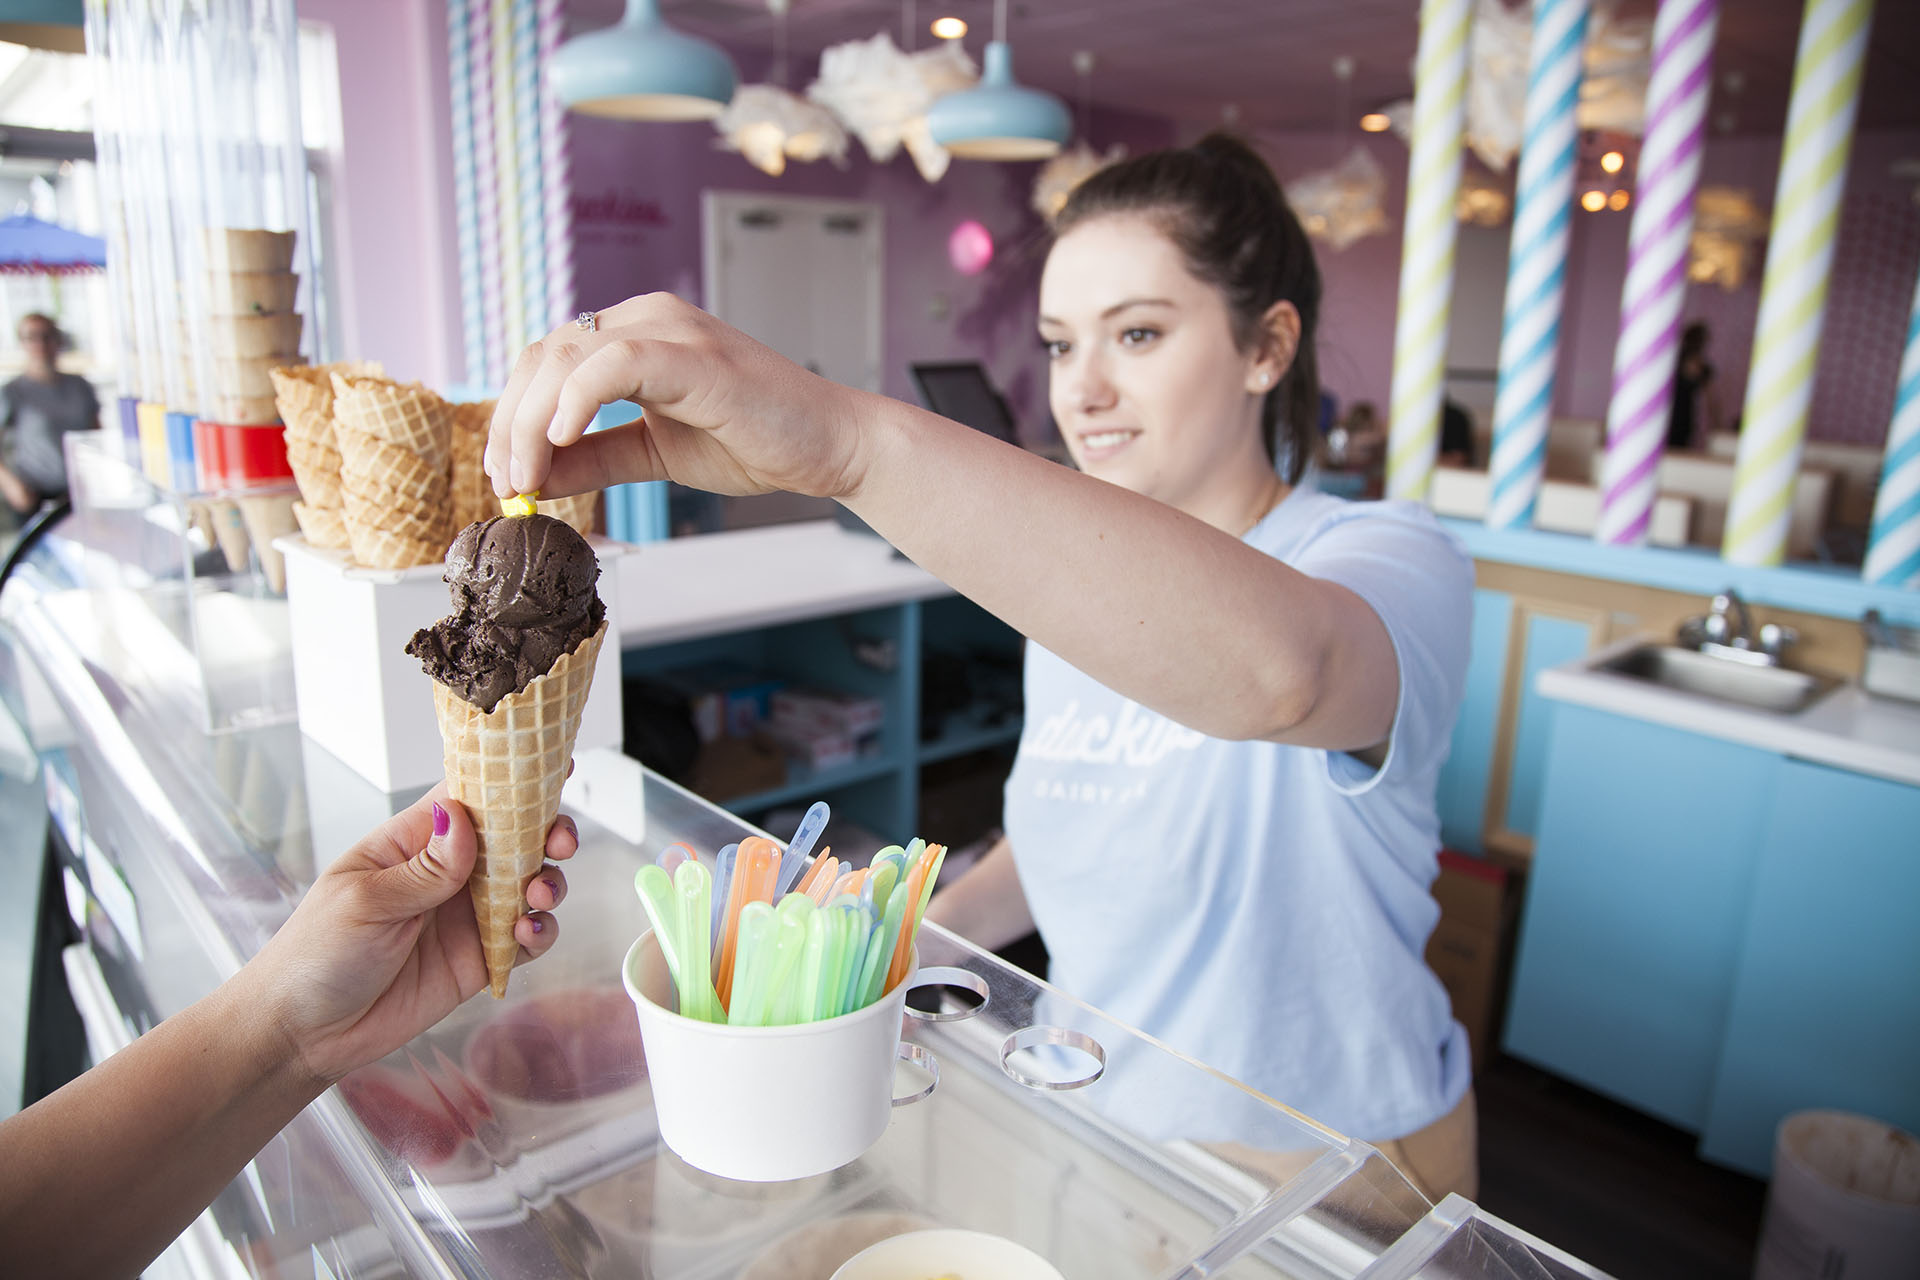 Staff member at Duckies Dairy Bar adding a confection to the top of an ice cream cone